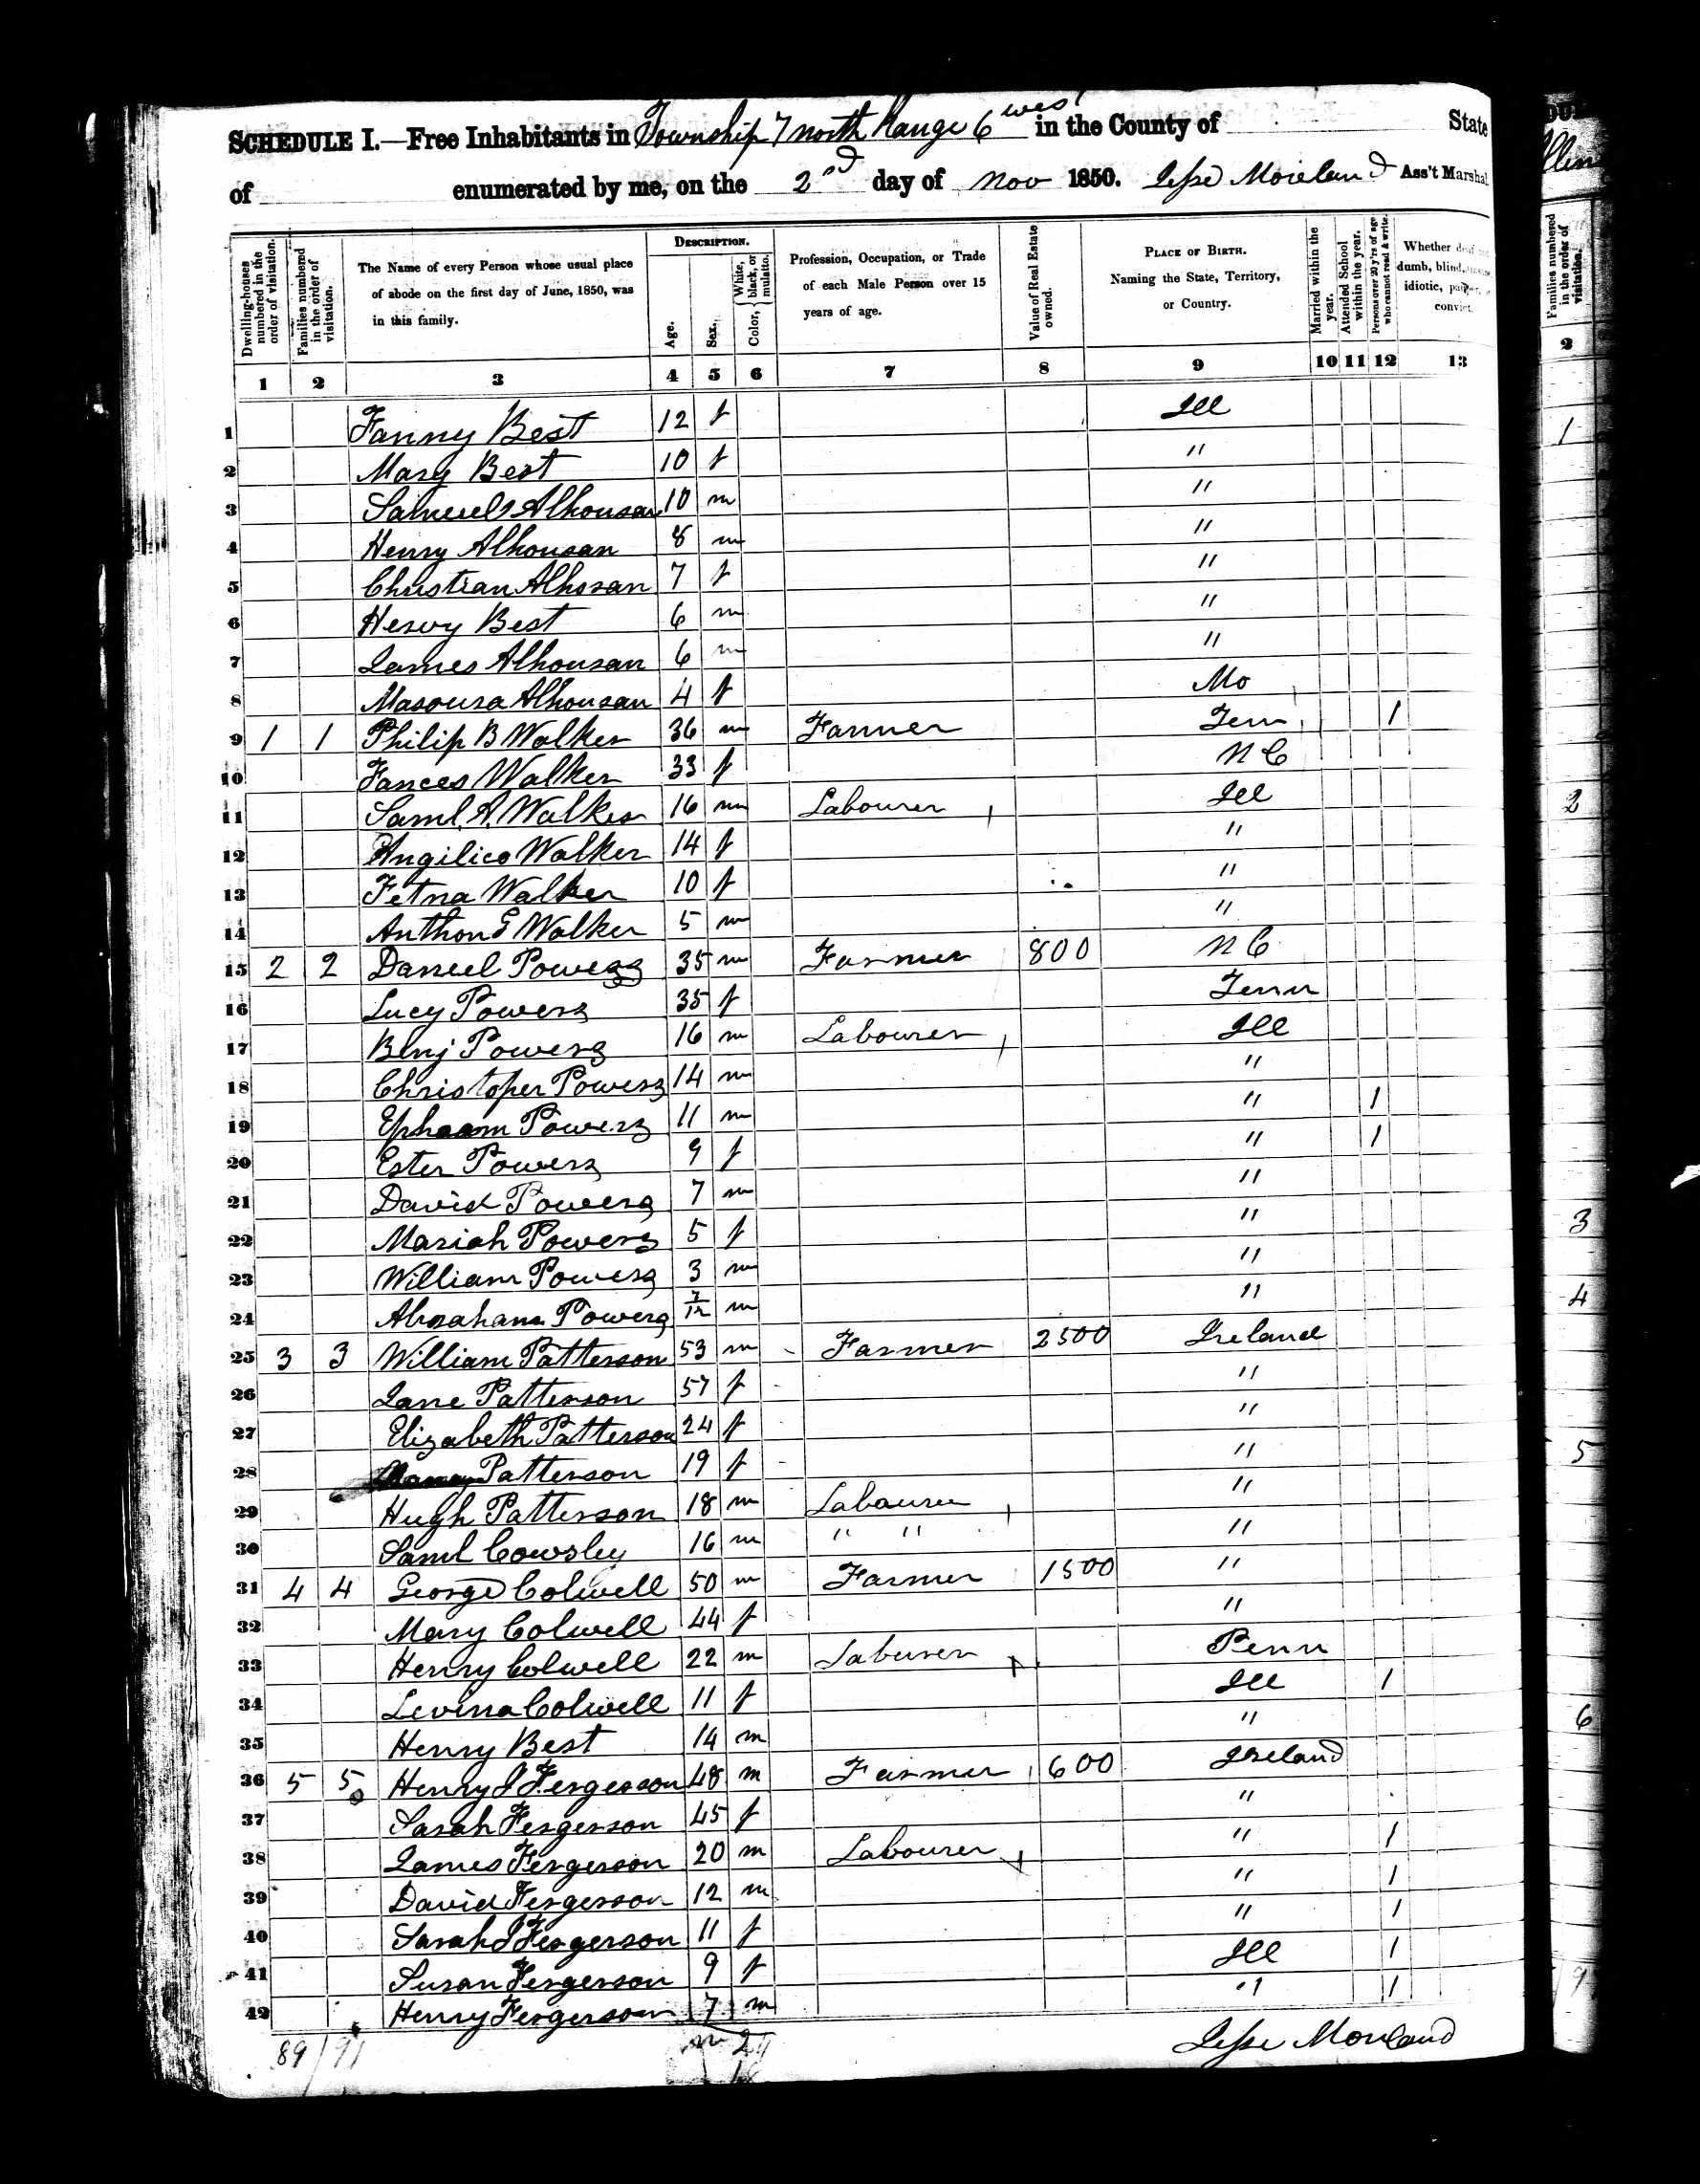 Phillip V. Walker, possible son of Jacob and Agnes, 1850 Macoupin County, Illinois, census